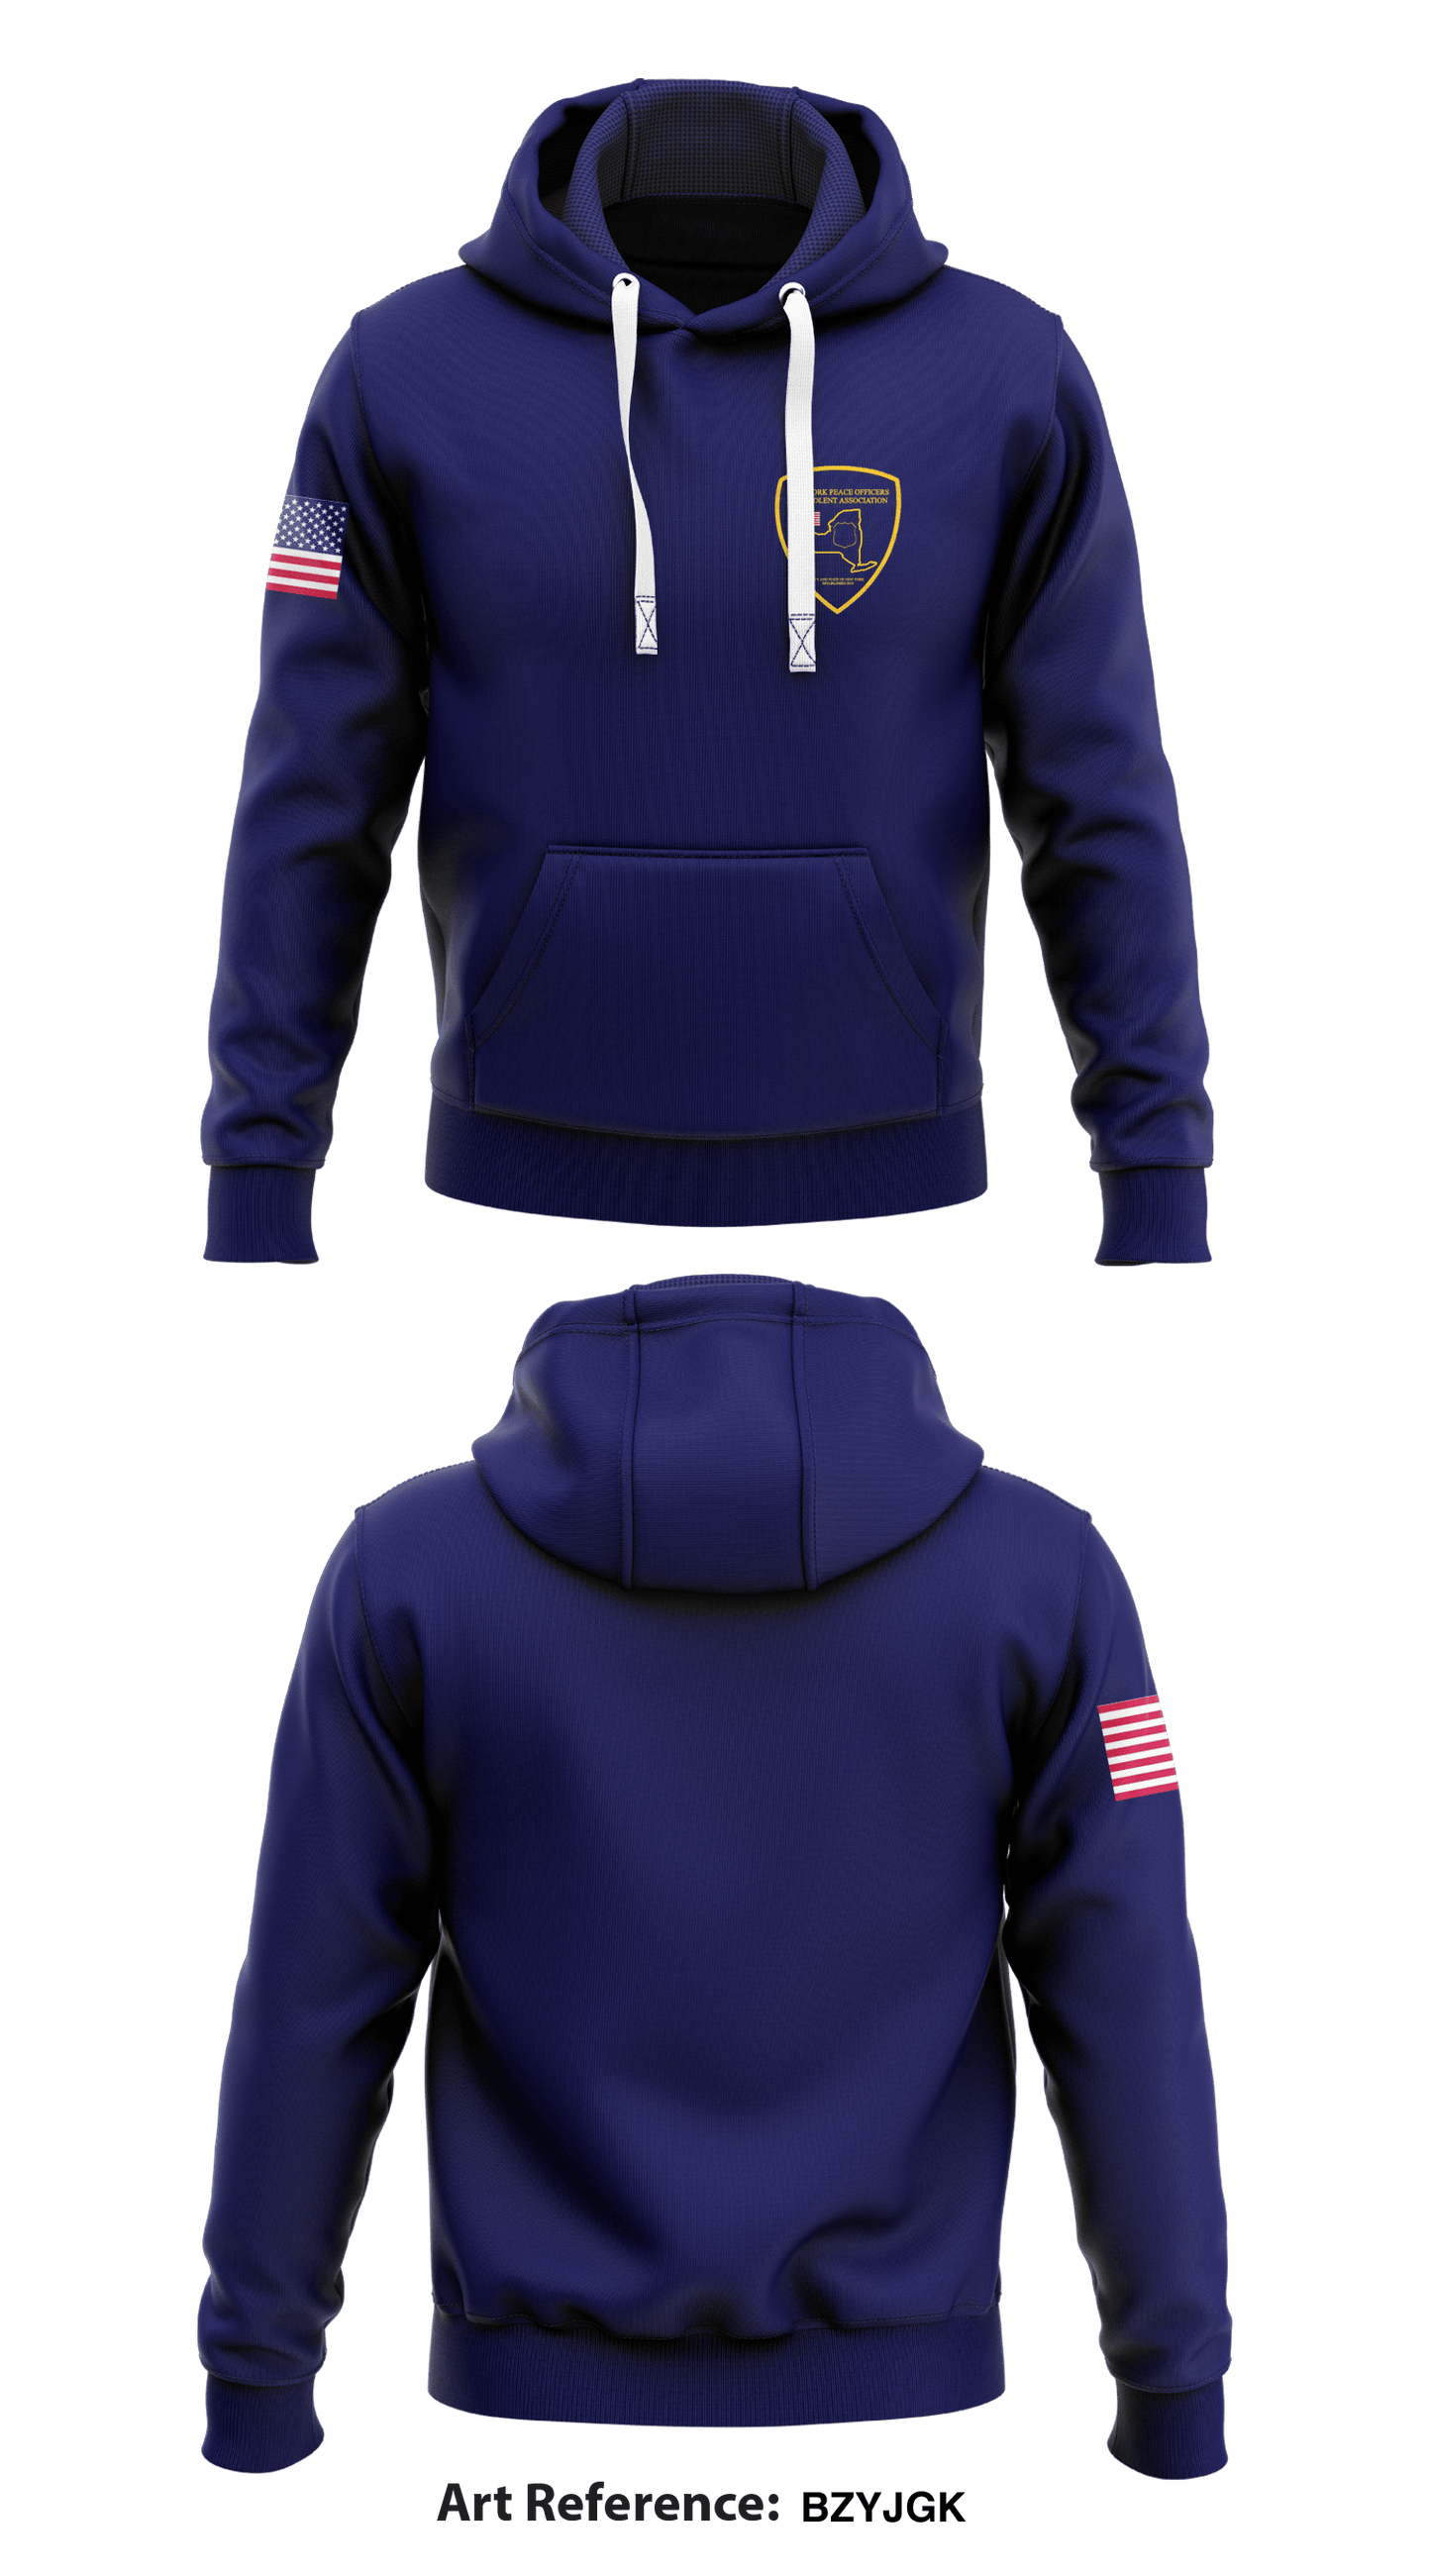 NY PEACE OFFICERS AMERICAN WARPIPES AND BENEVOLENT ASSOCIATION  Store 1  Core Men's Hooded Performance Sweatshirt - BzyjGK